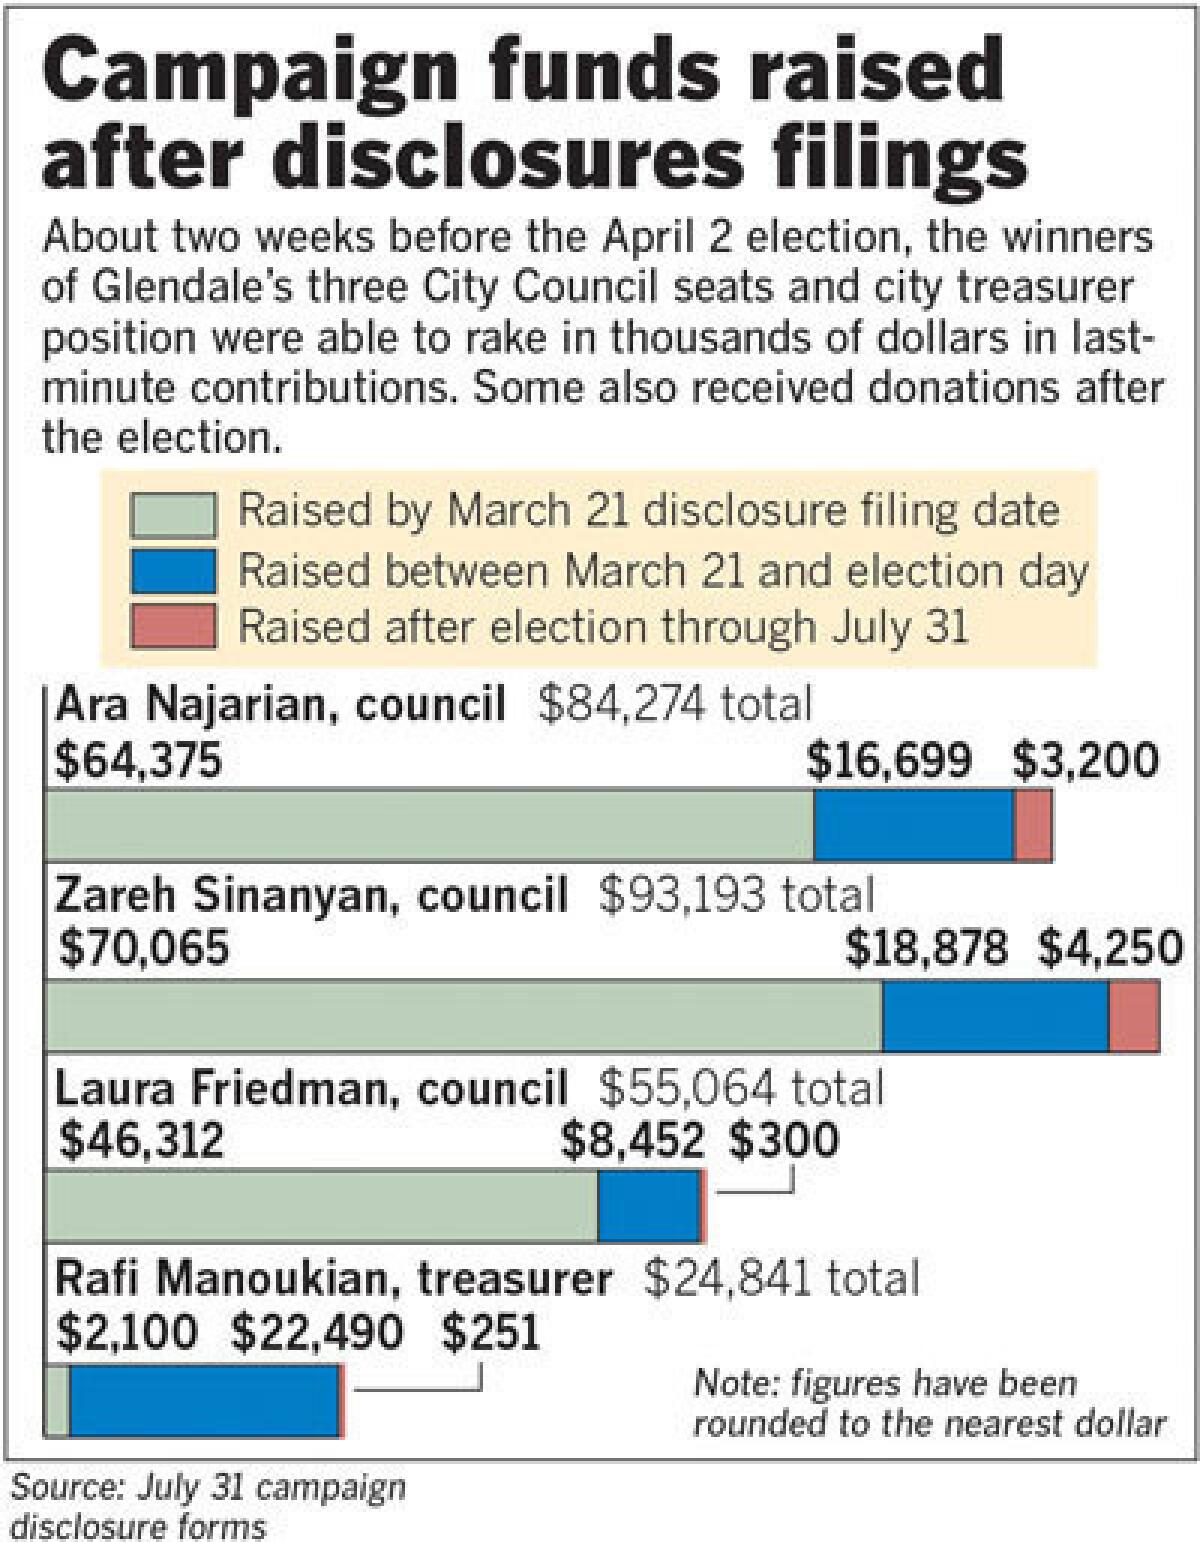 Glendale City Councilmembers Ara Najarian, Zareh Sinanyan and Laura Friedman raked in thousands of dollars in last minute contributions. Treasurer Rafi Manoukian also received donations after the election.